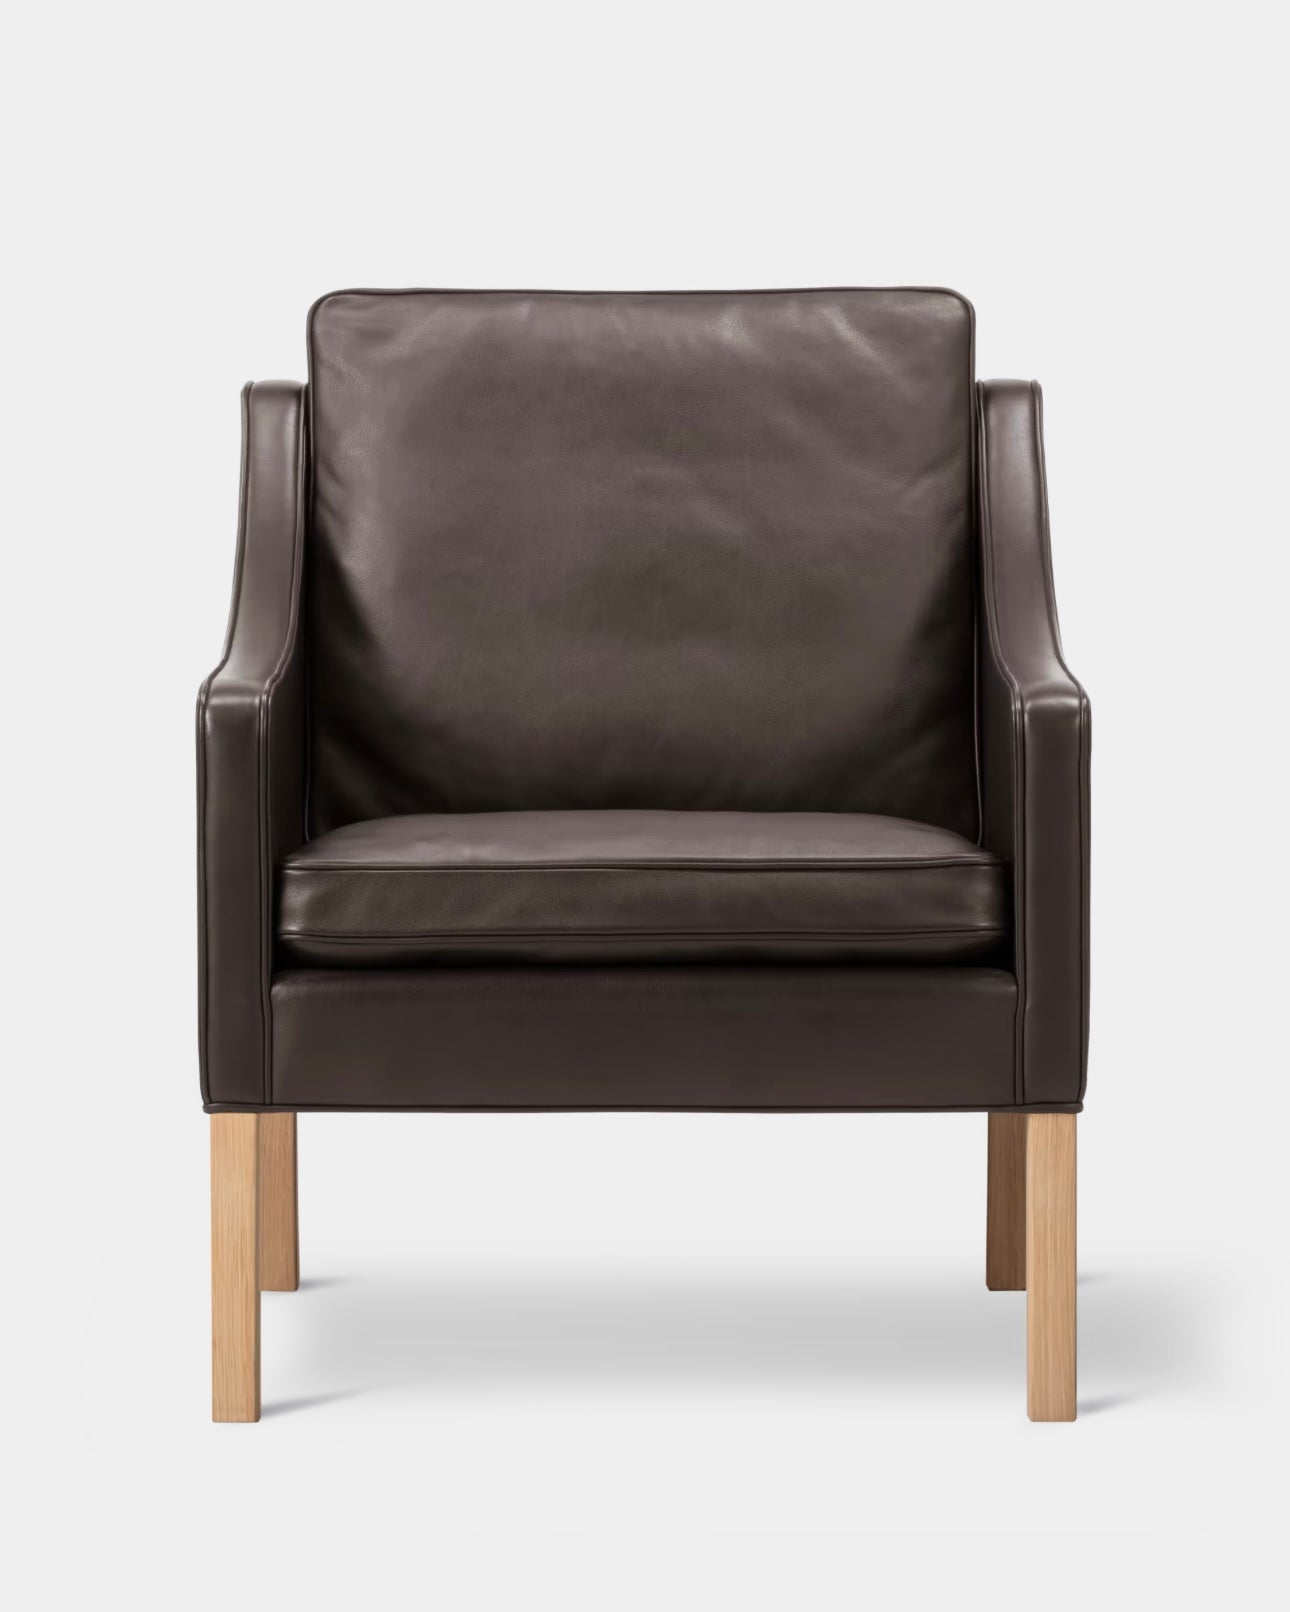 Mogensen 2207 Club Chair | Mocca Leather and Oiled Oak